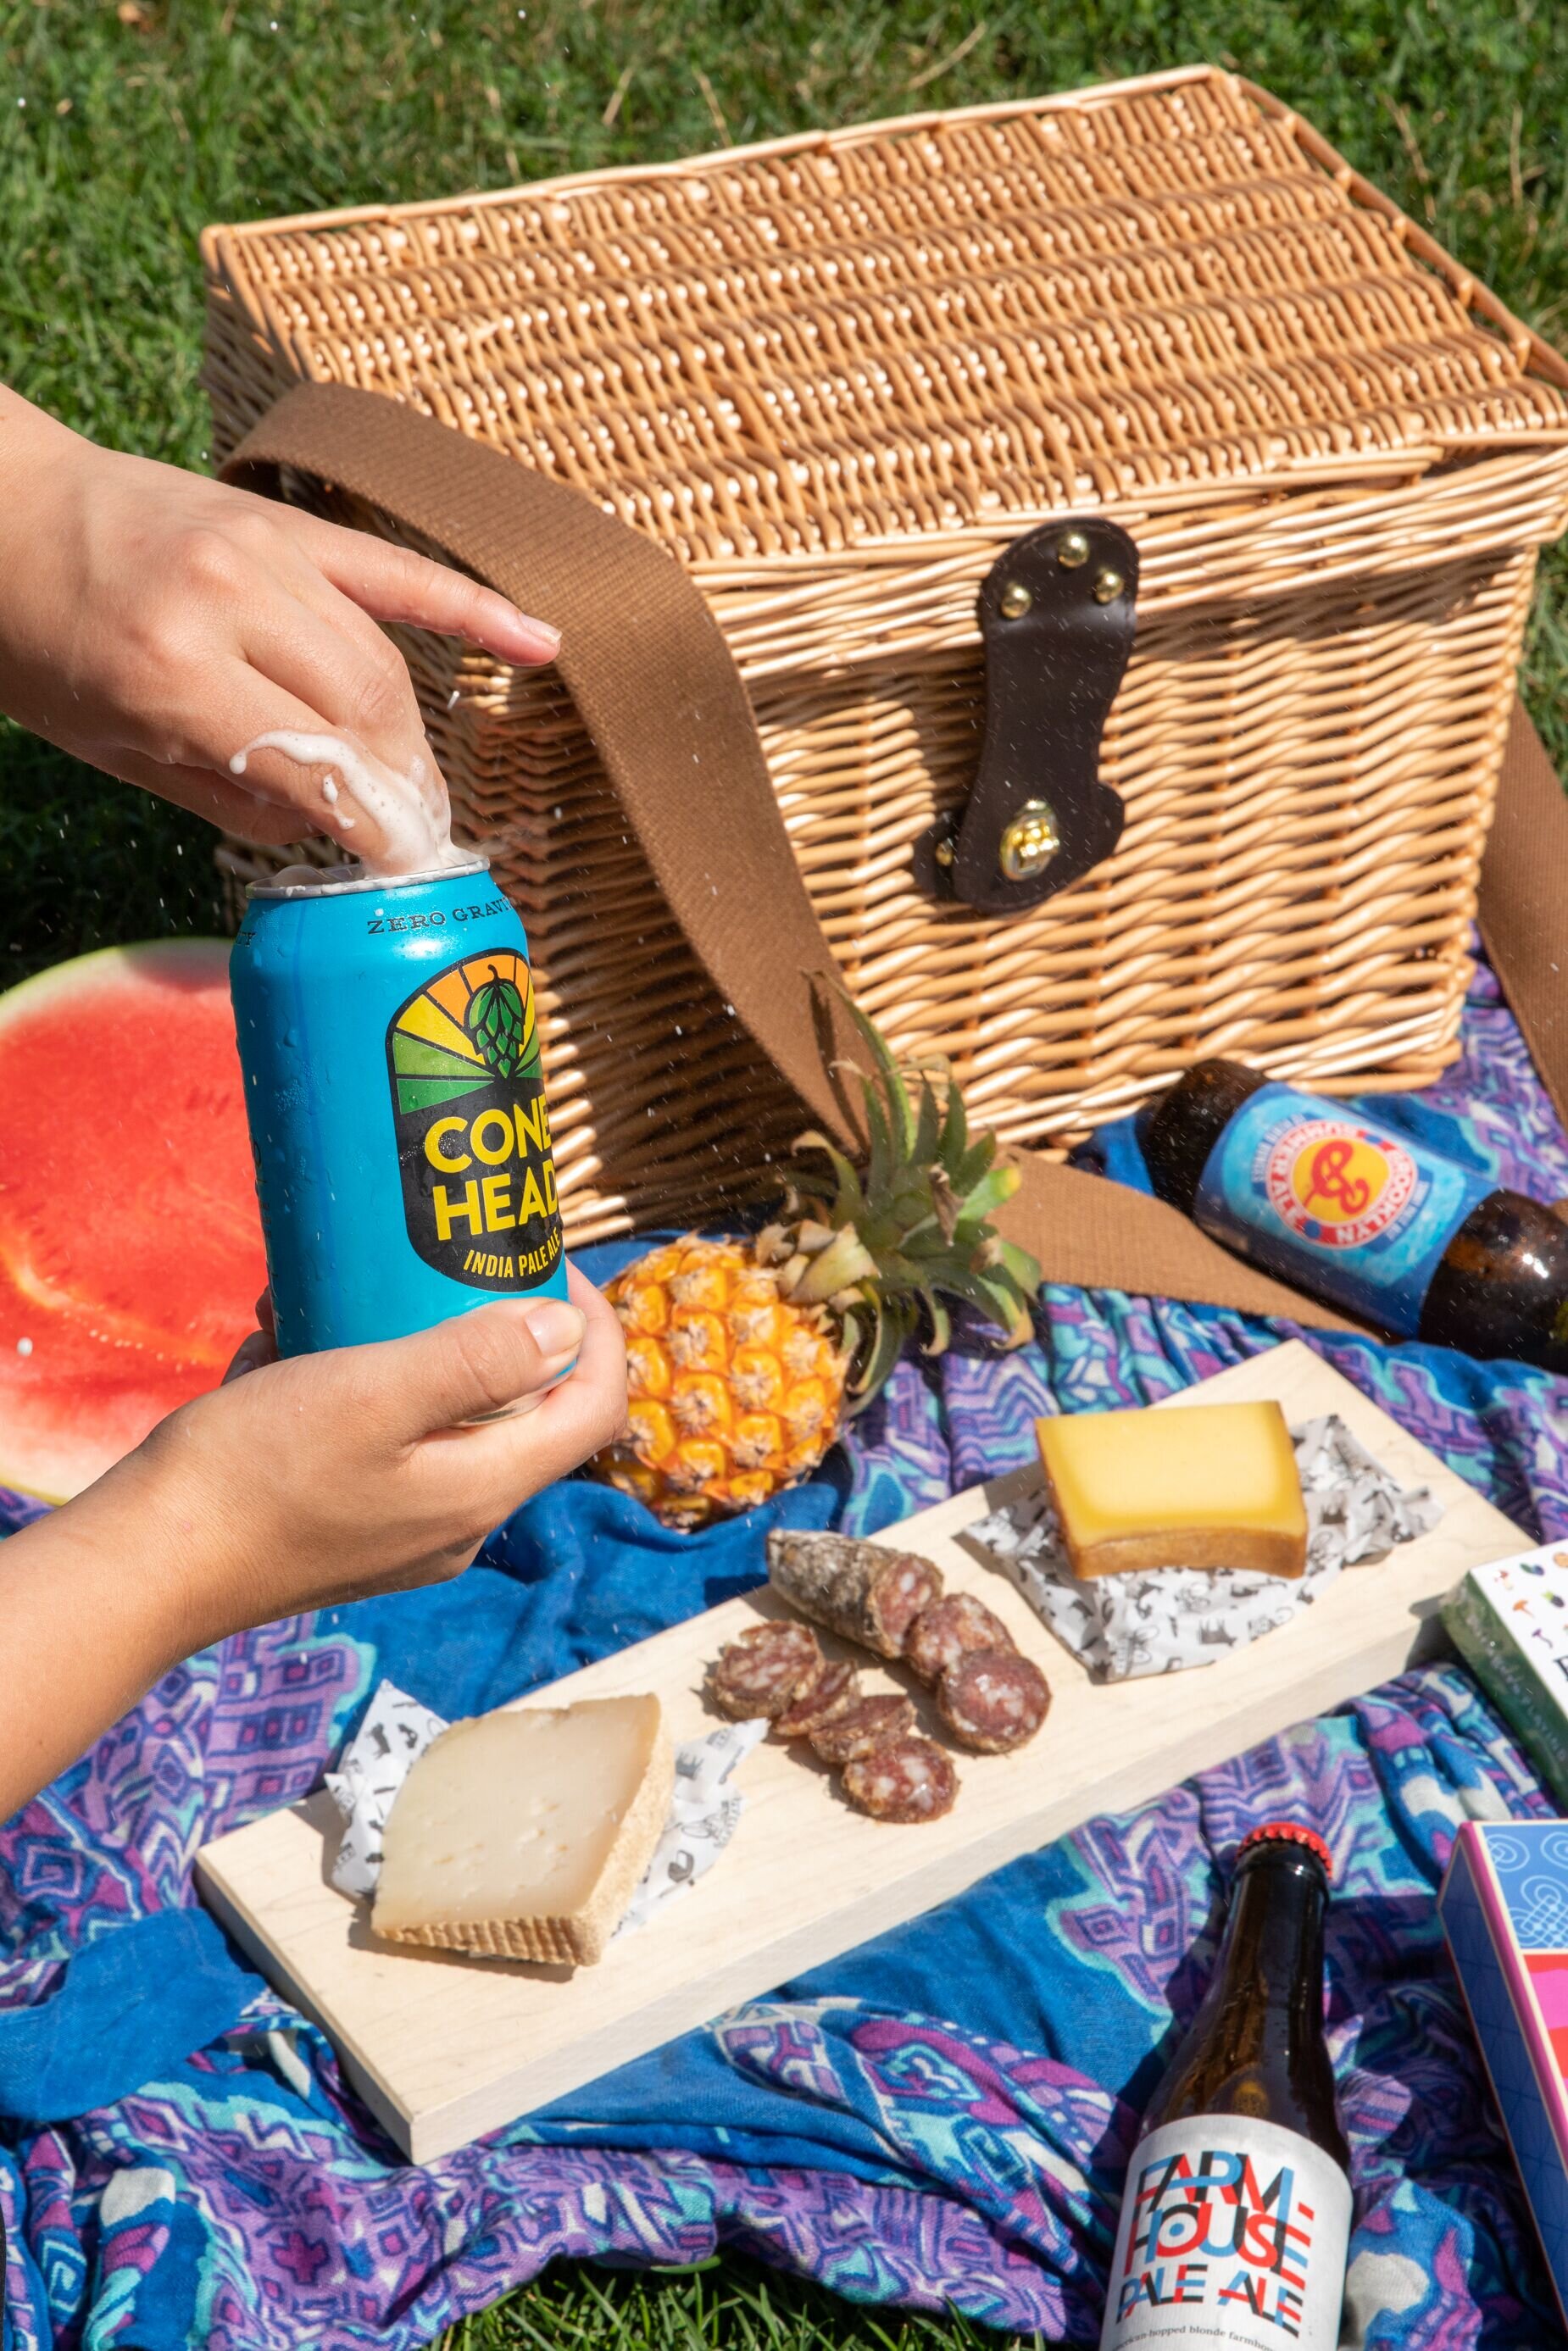 picnic basket on grass with a cheese board with meat and cheese and a hand opening a canned beer